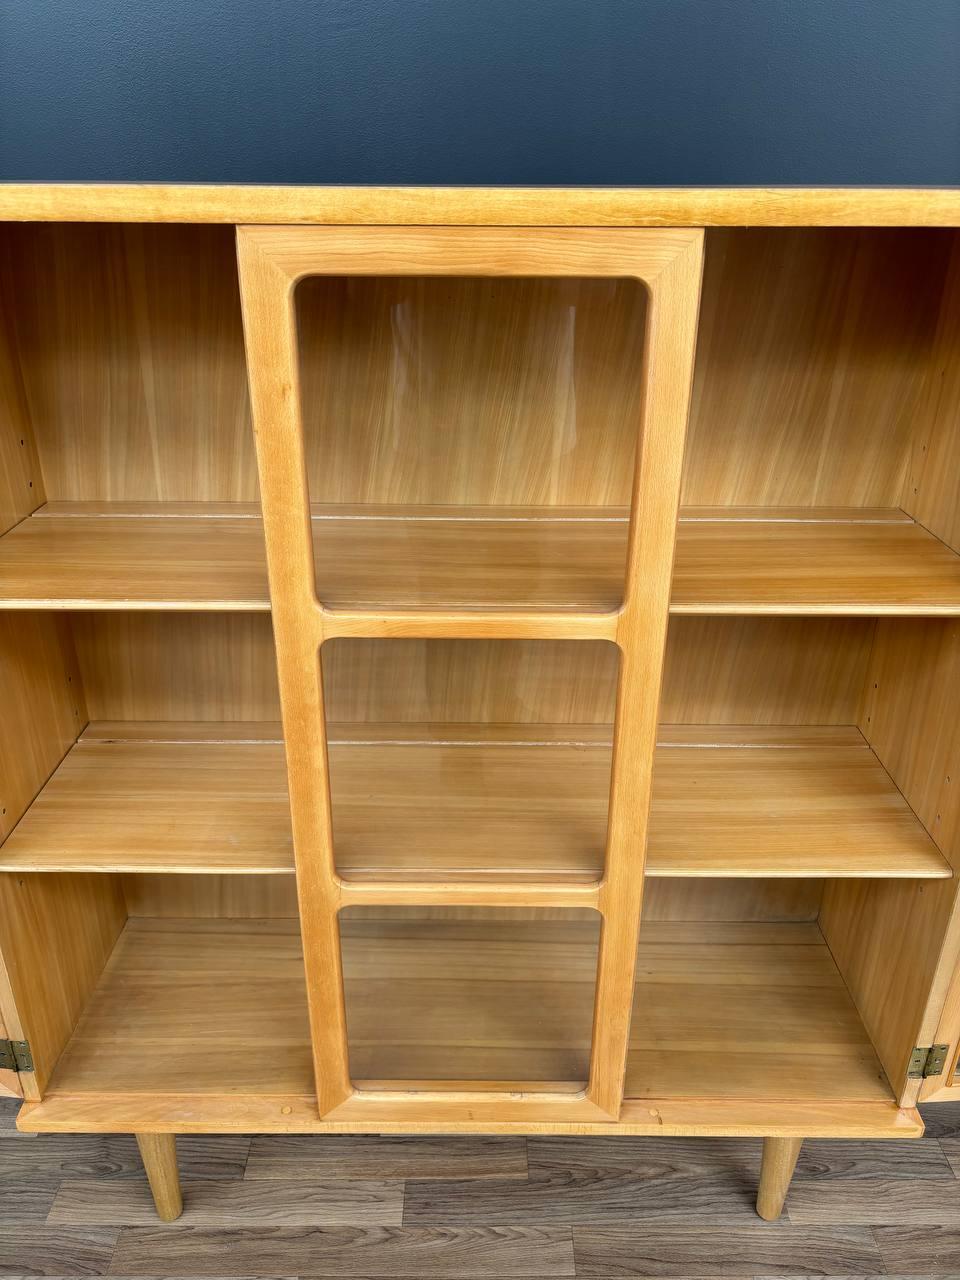 Mid-20th Century Newly Refinished - Mid-Century Modern Bookcase by Edward Wormley for Drexel